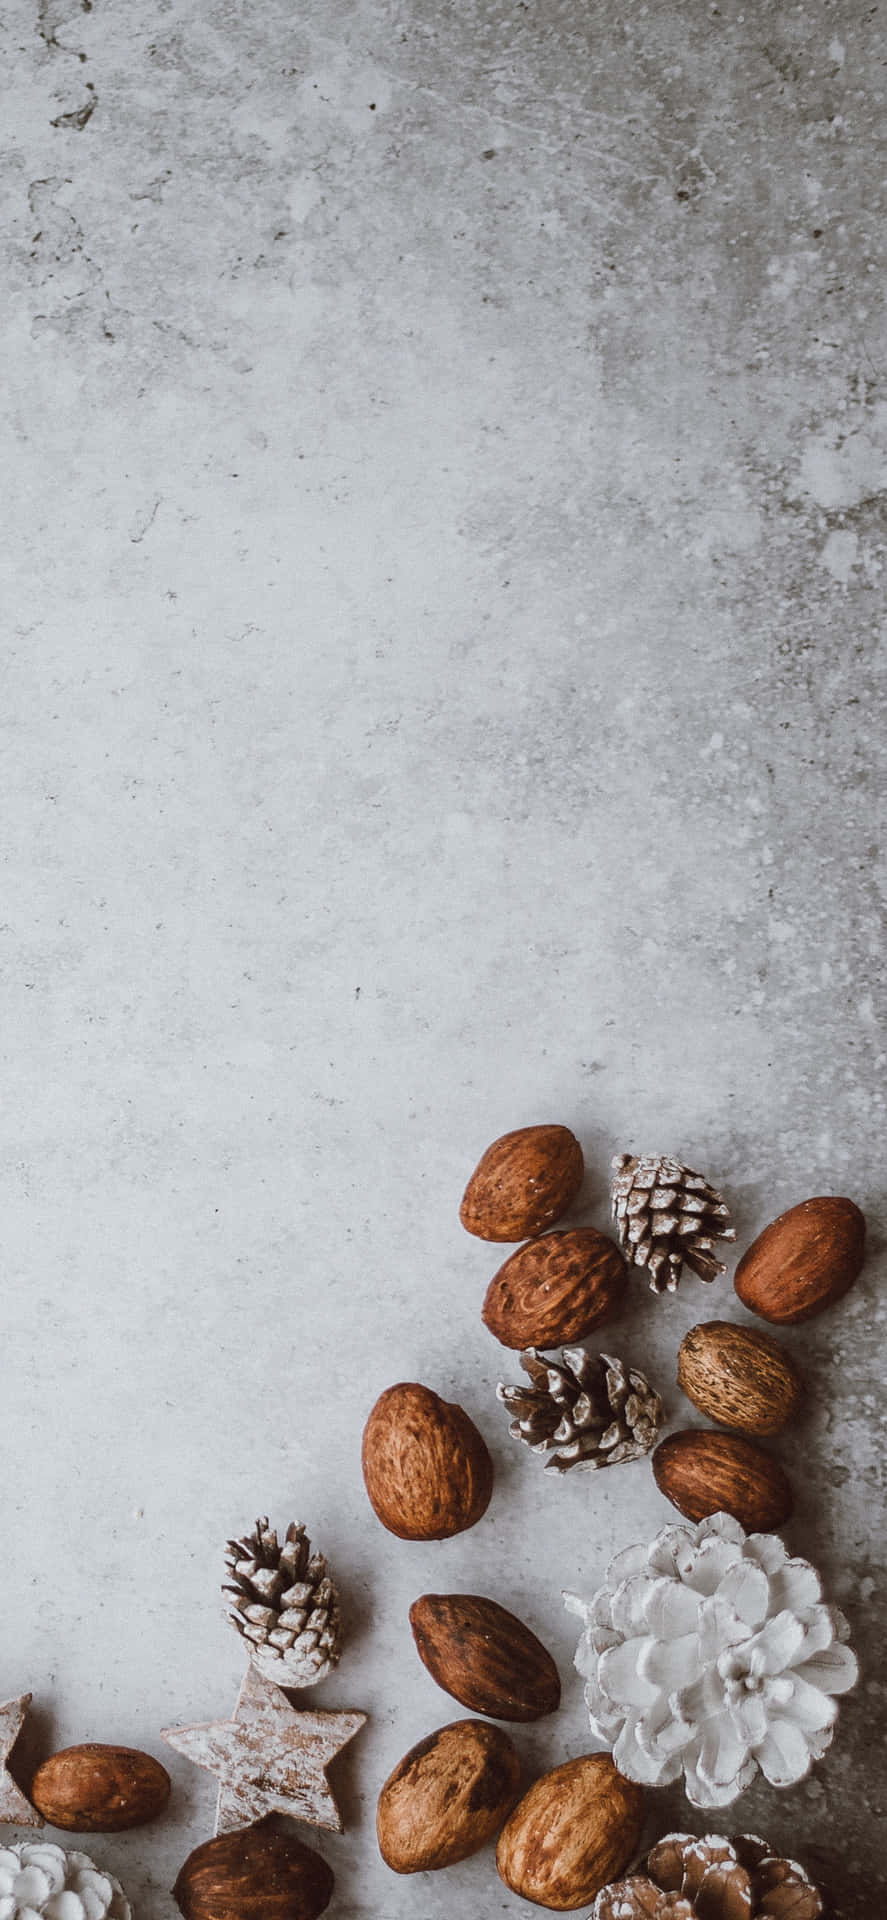 Warm and Comforting Winter Food Wallpaper